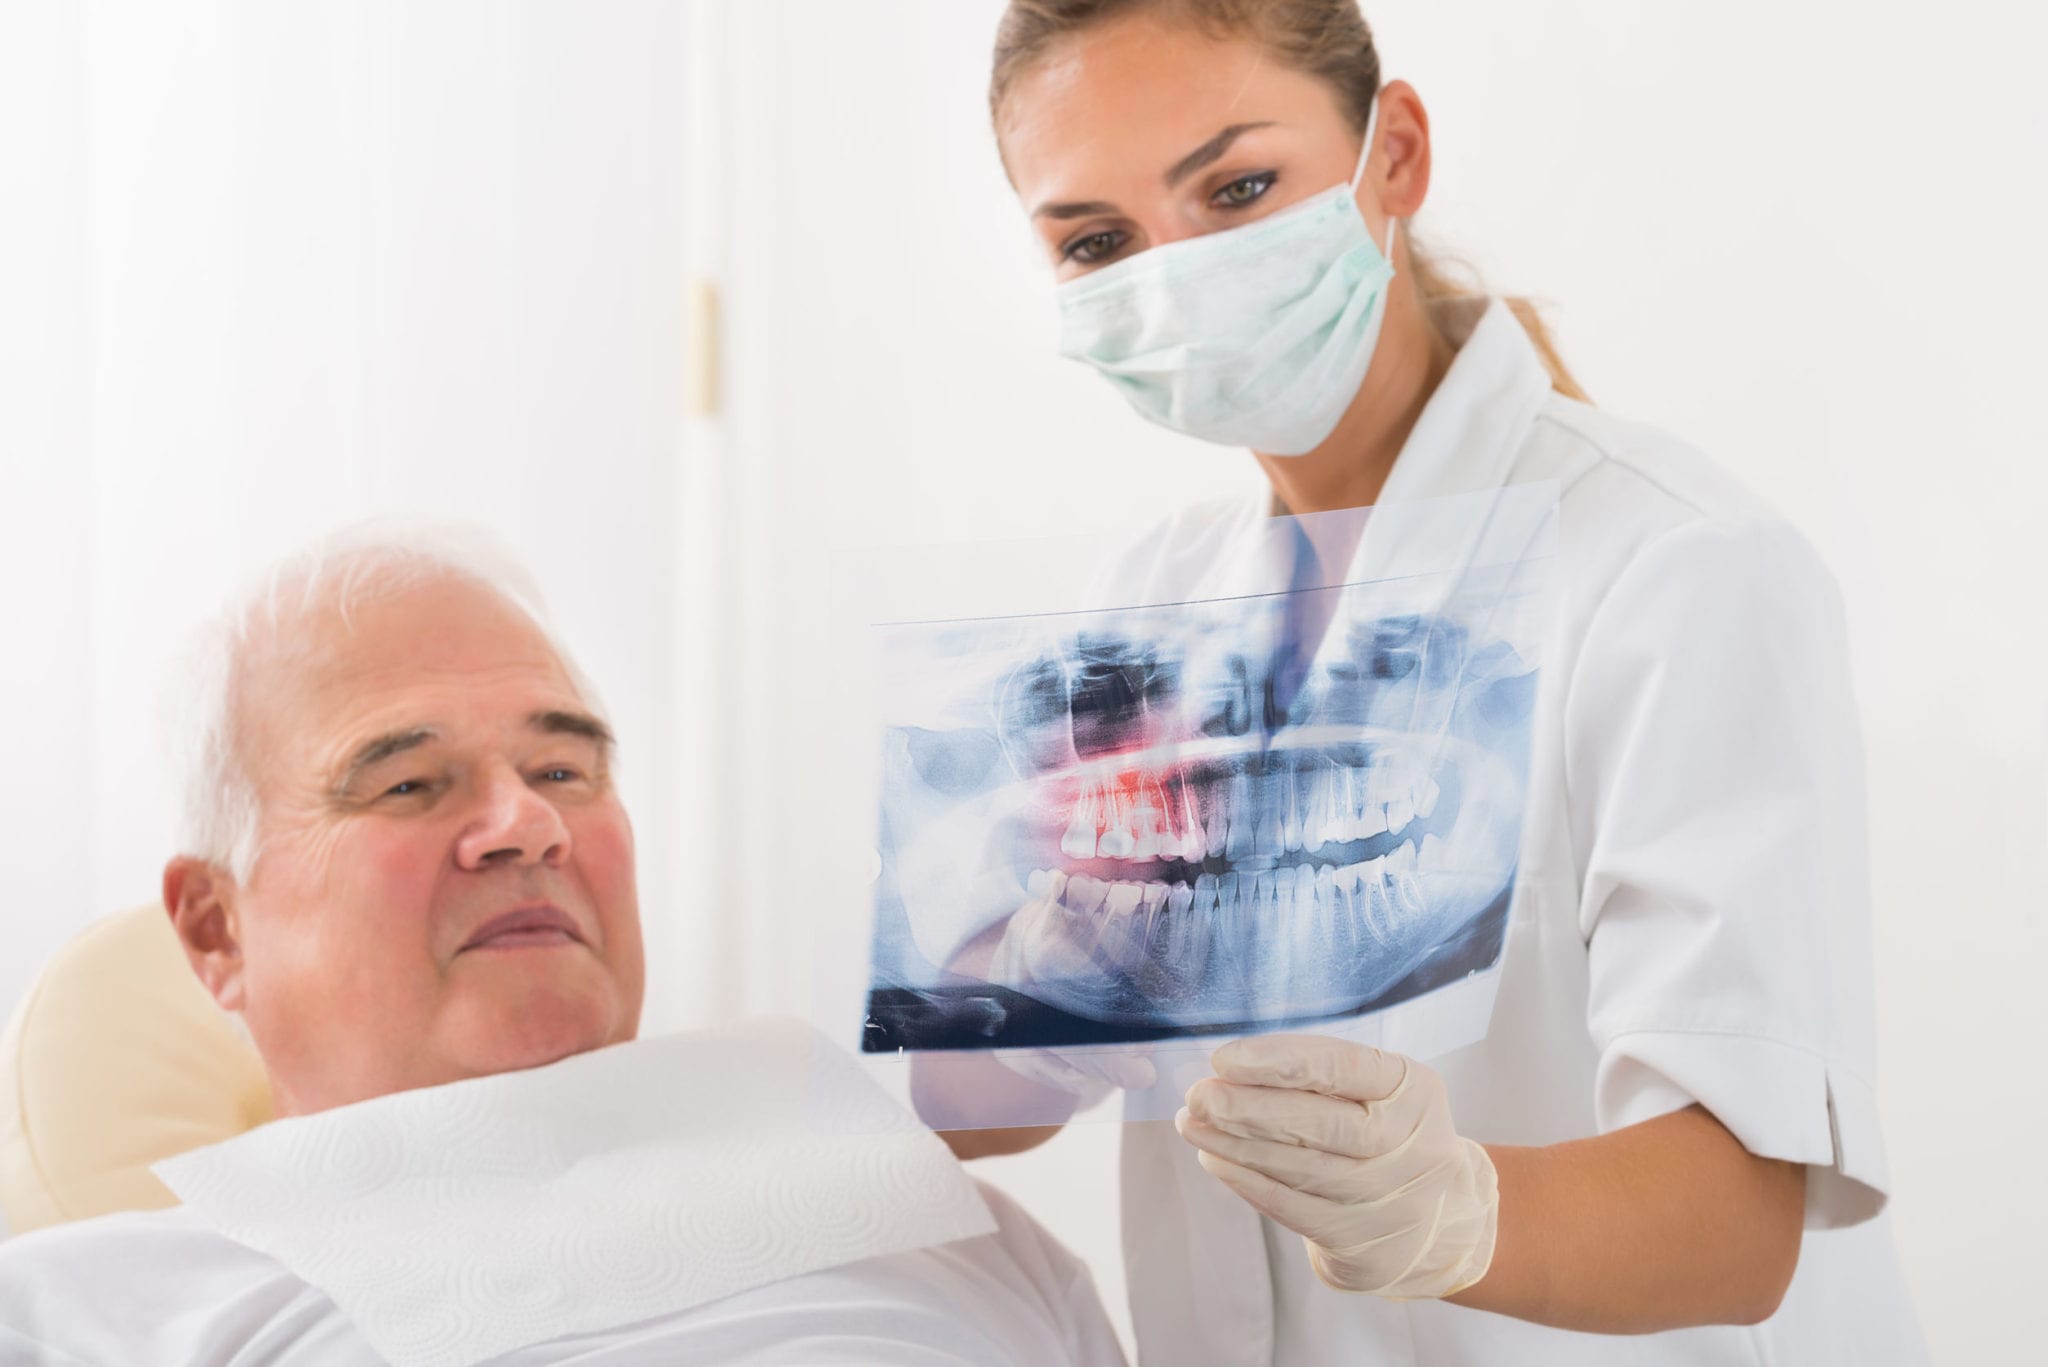 Dentists in South Florida